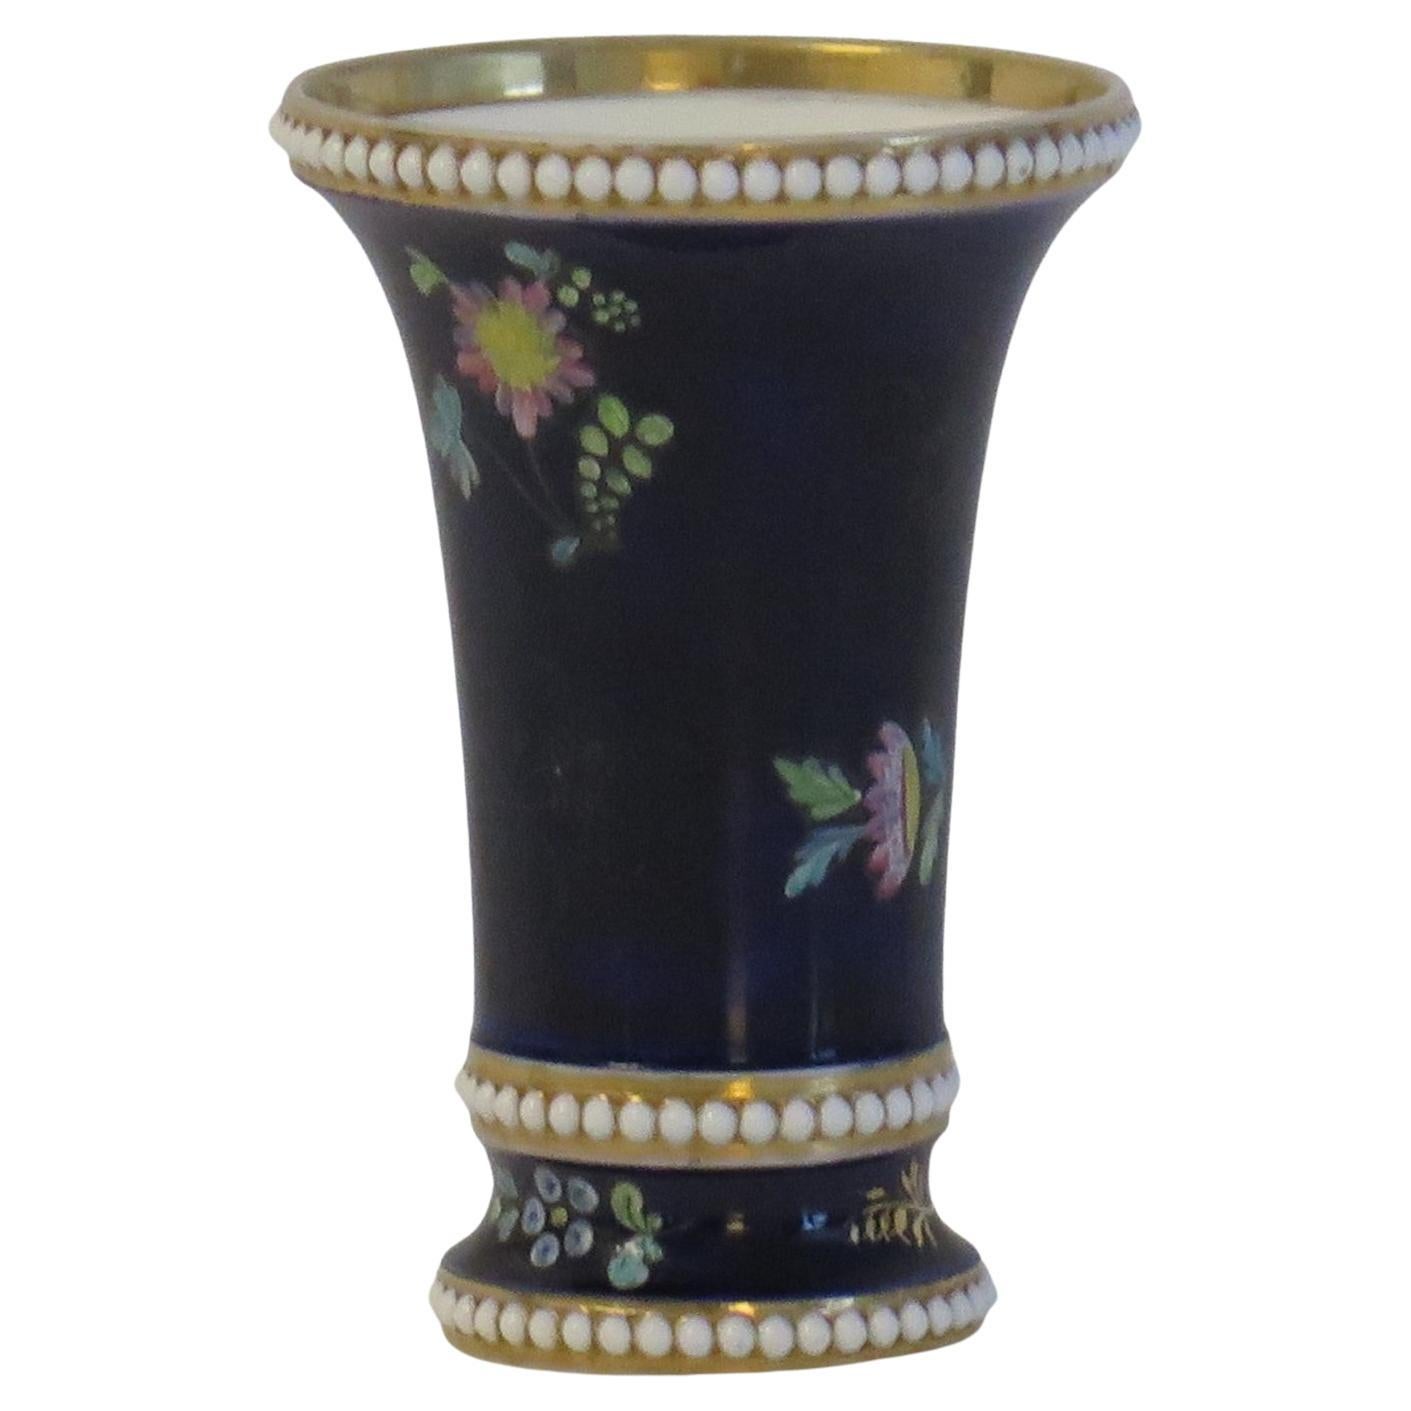 This is a small spill vase, hand painted in enamelled & gilded floral sprigs against a Mazarine blue ground, made by Josiah Spode, Stoke on Trent, England and dating to circa 1810.

The vase is well potted with a tapering shape and beaded